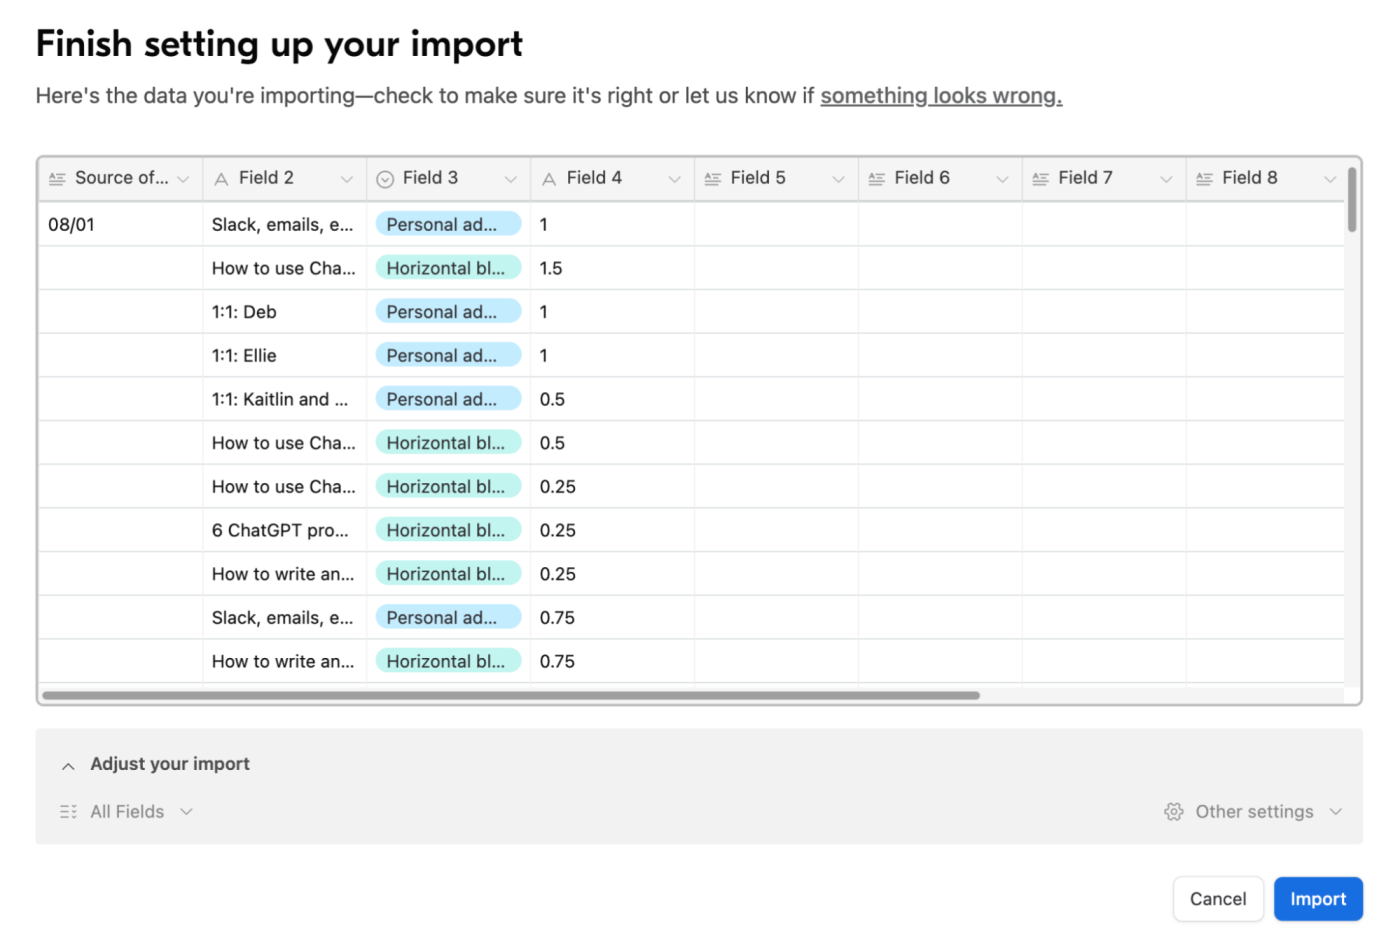 Example of the final stage of importing data to Airtable.